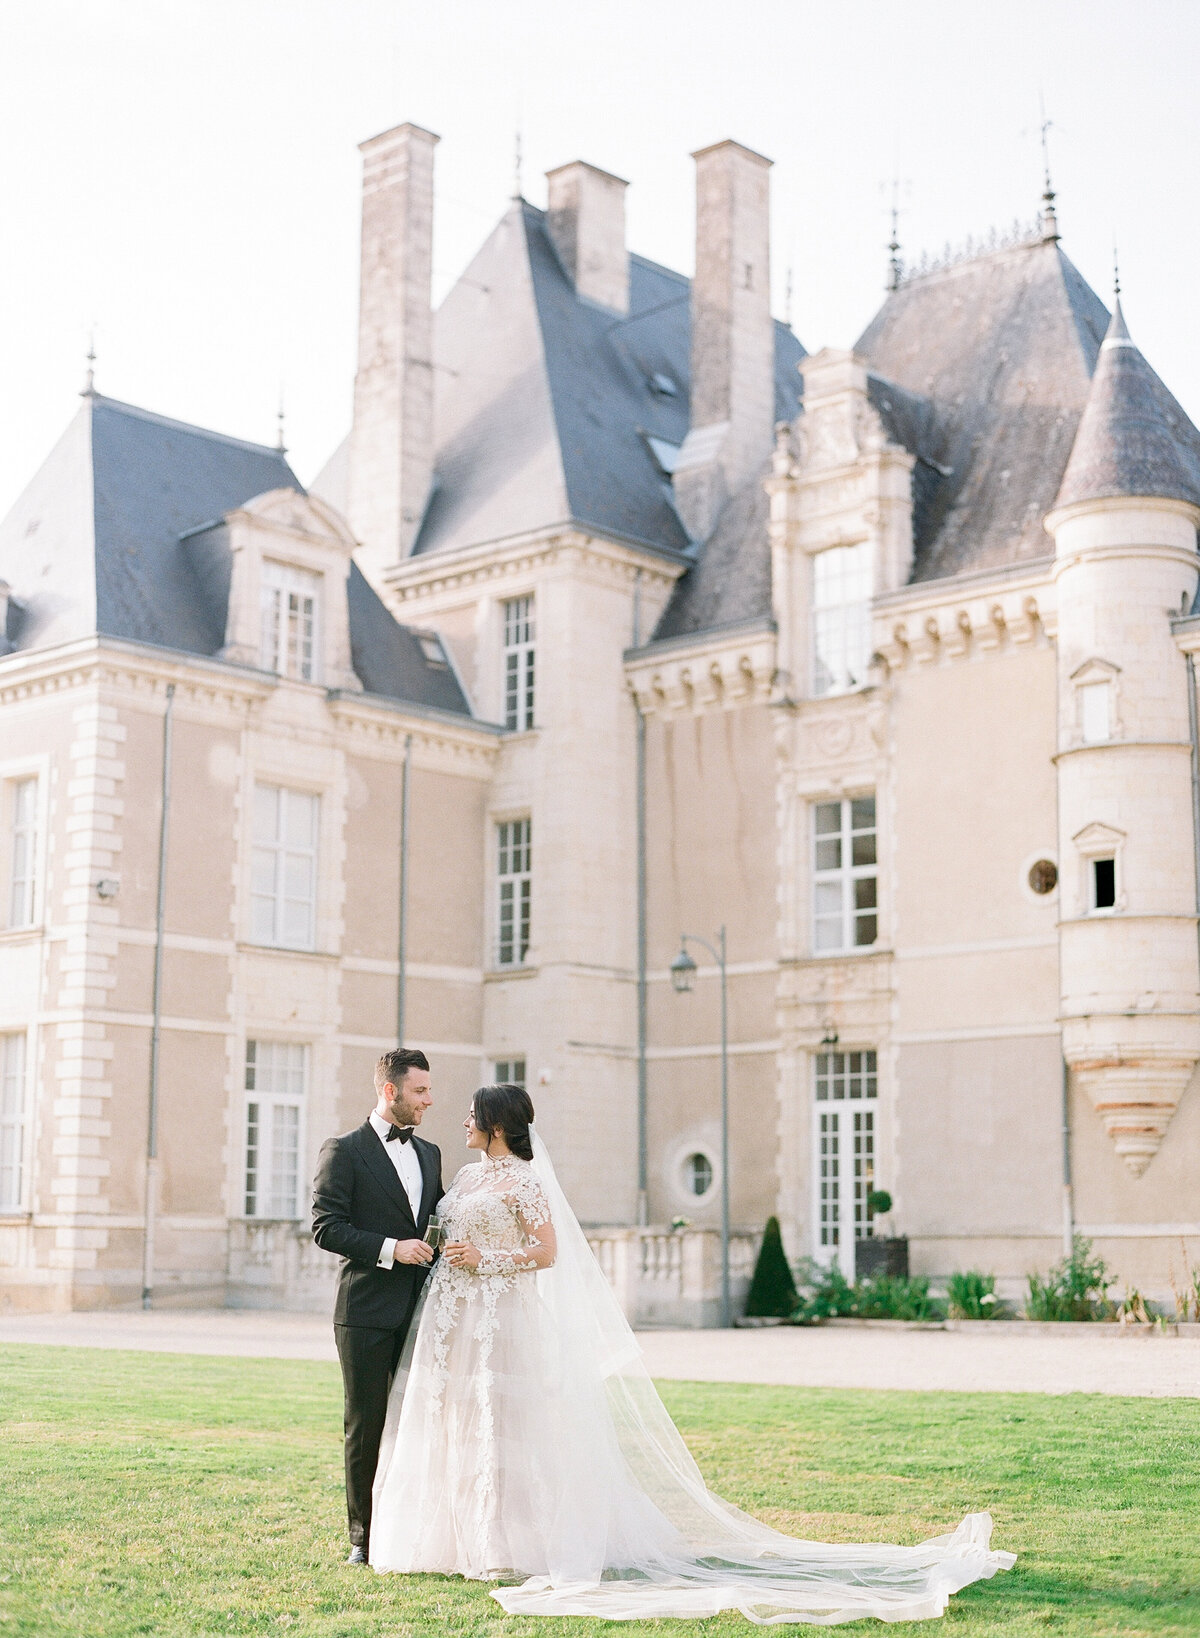 Jennifer Fox Weddings English speaking wedding planning & design agency in France crafting refined and bespoke weddings and celebrations Provence, Paris and destination Molly-Carr-Photography-Natalie-Ryan-Bride-Groom-6